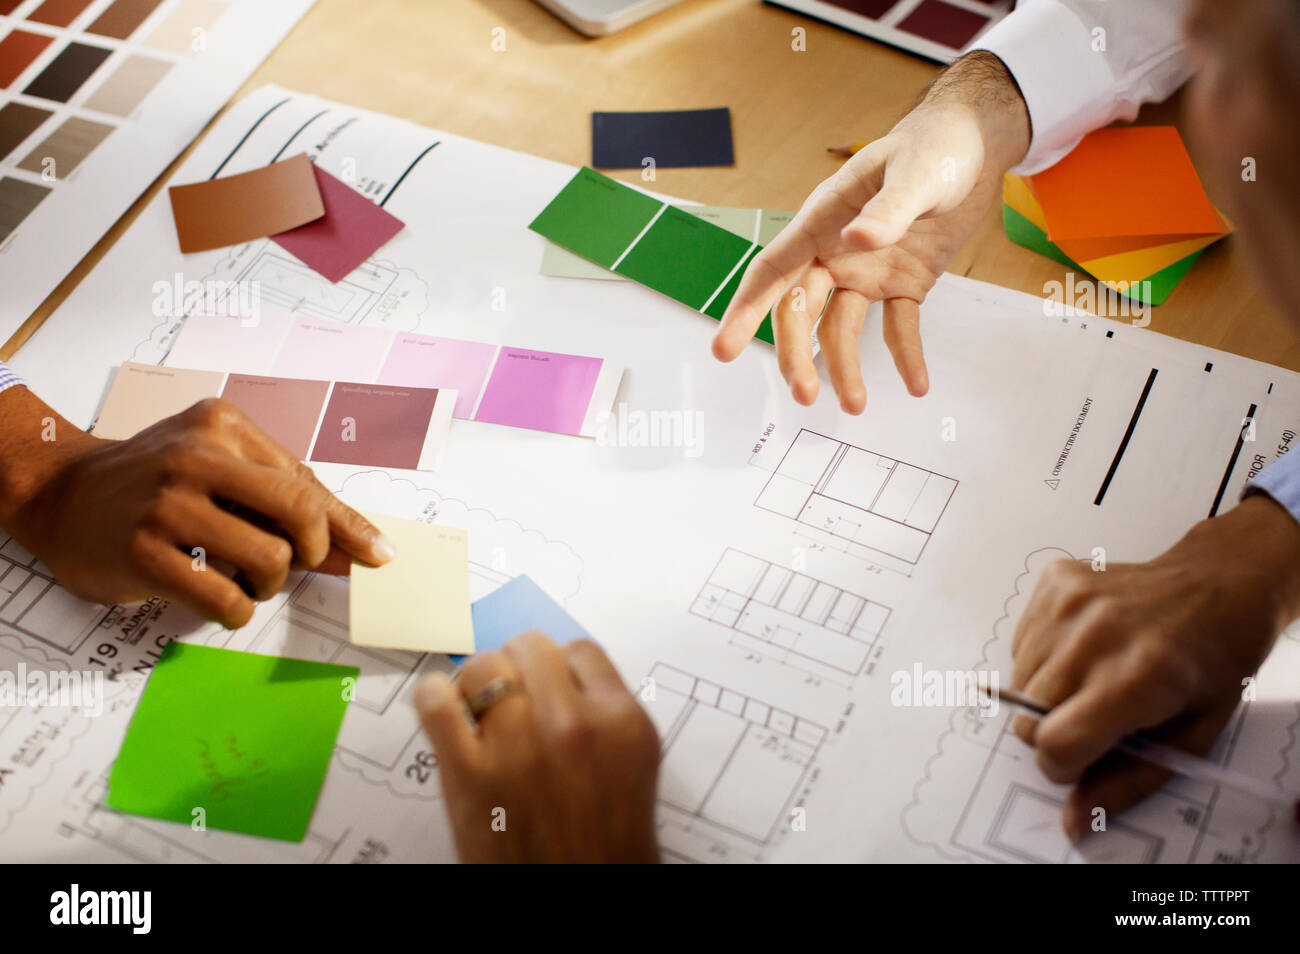 Cropped image of business people discussing for color swatches Stock Photo